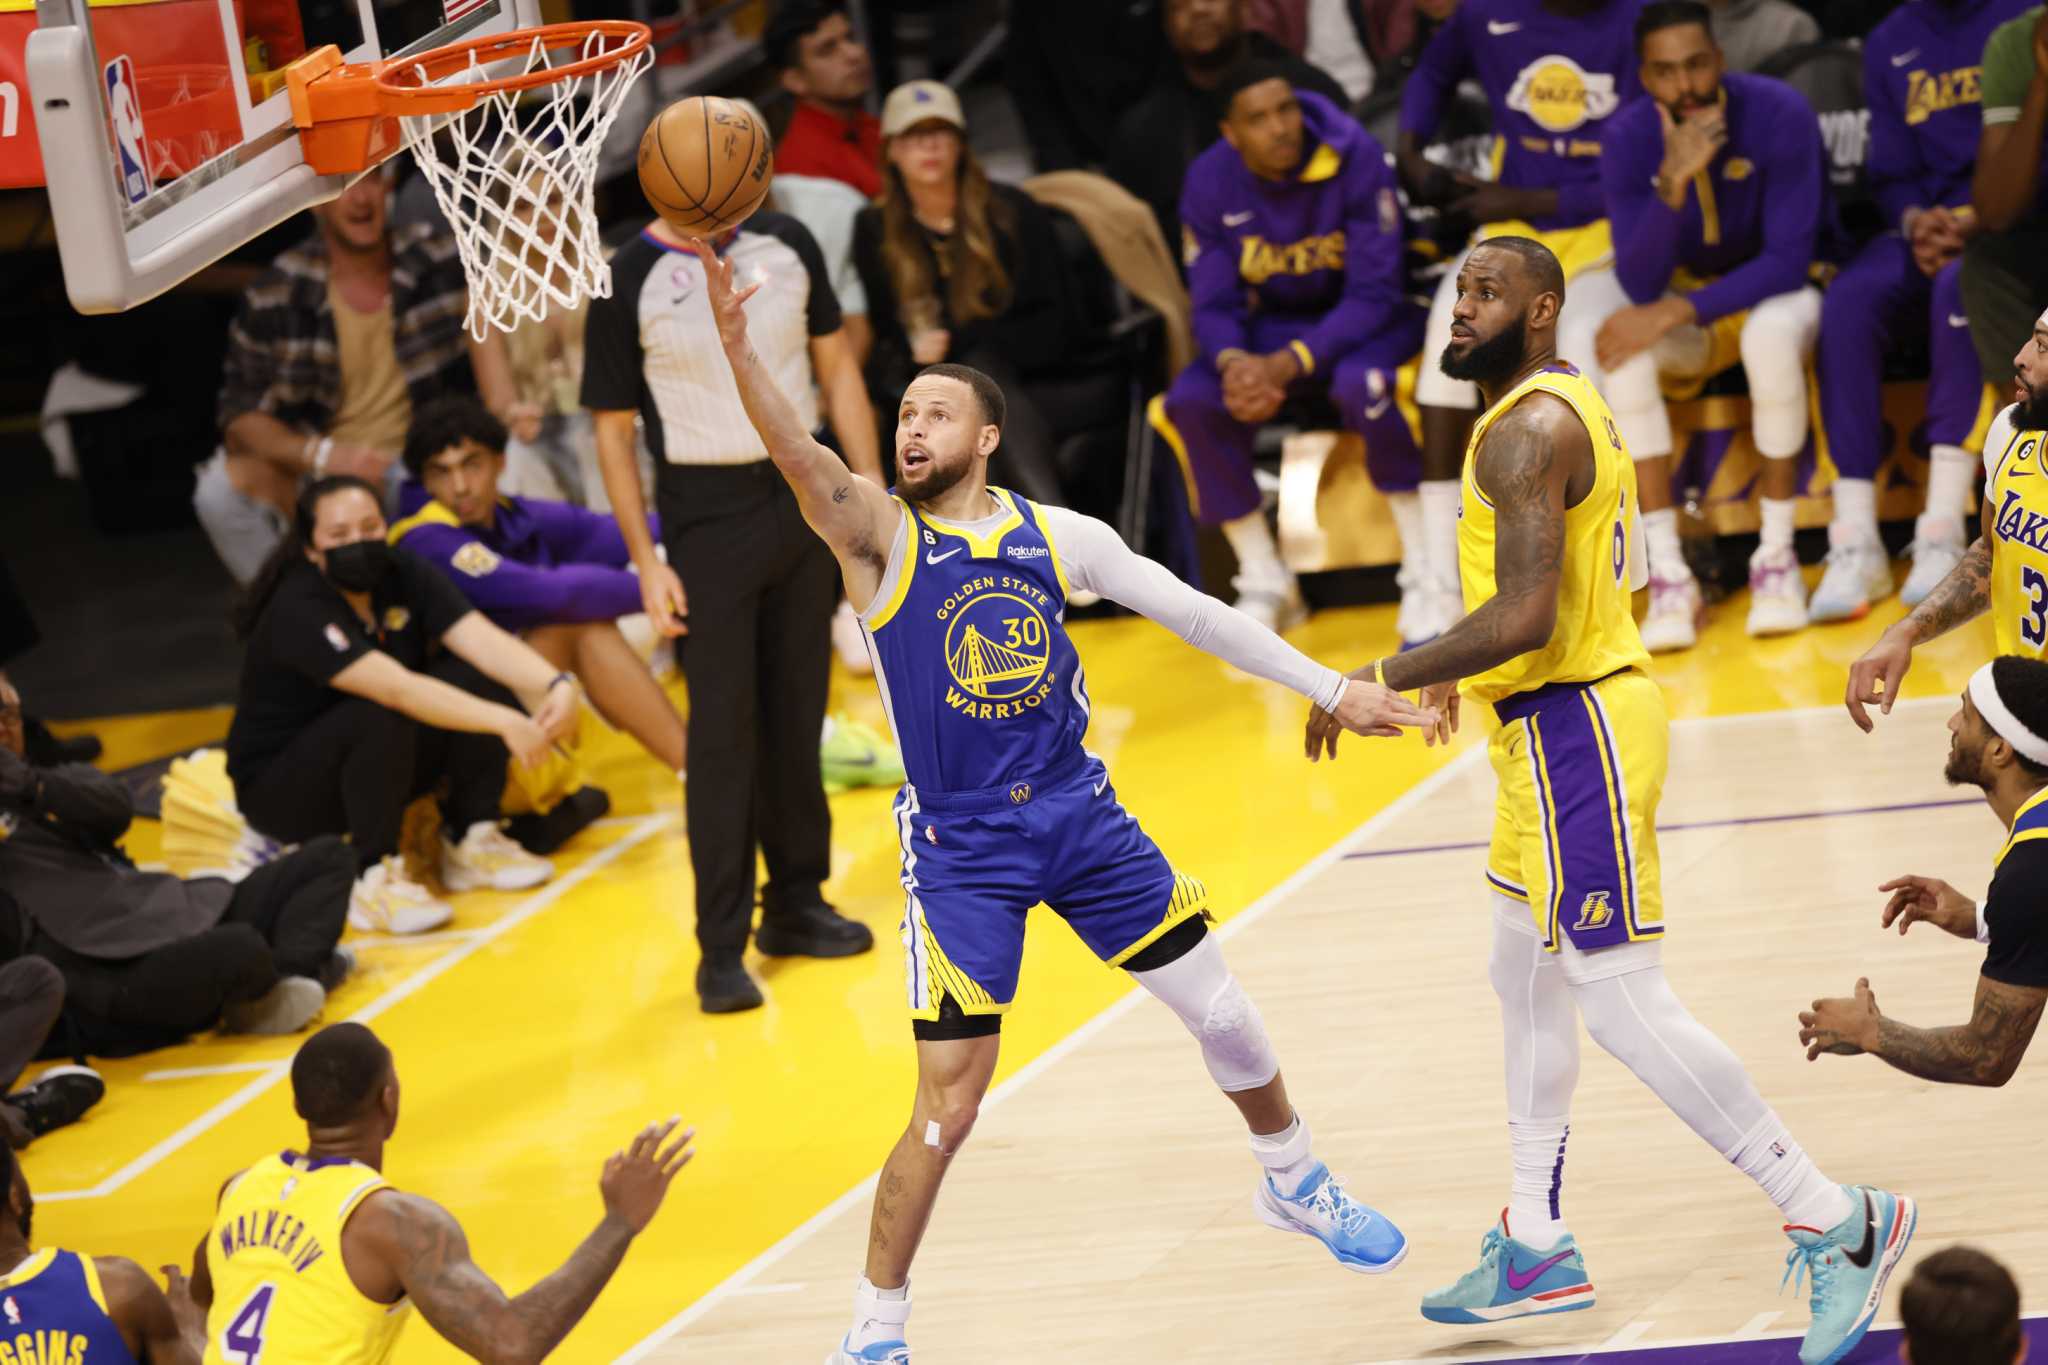 Lakers vs Warriors Game 4: LA takes 3-1 series lead over Golden State  despite Steph Curry's triple-double